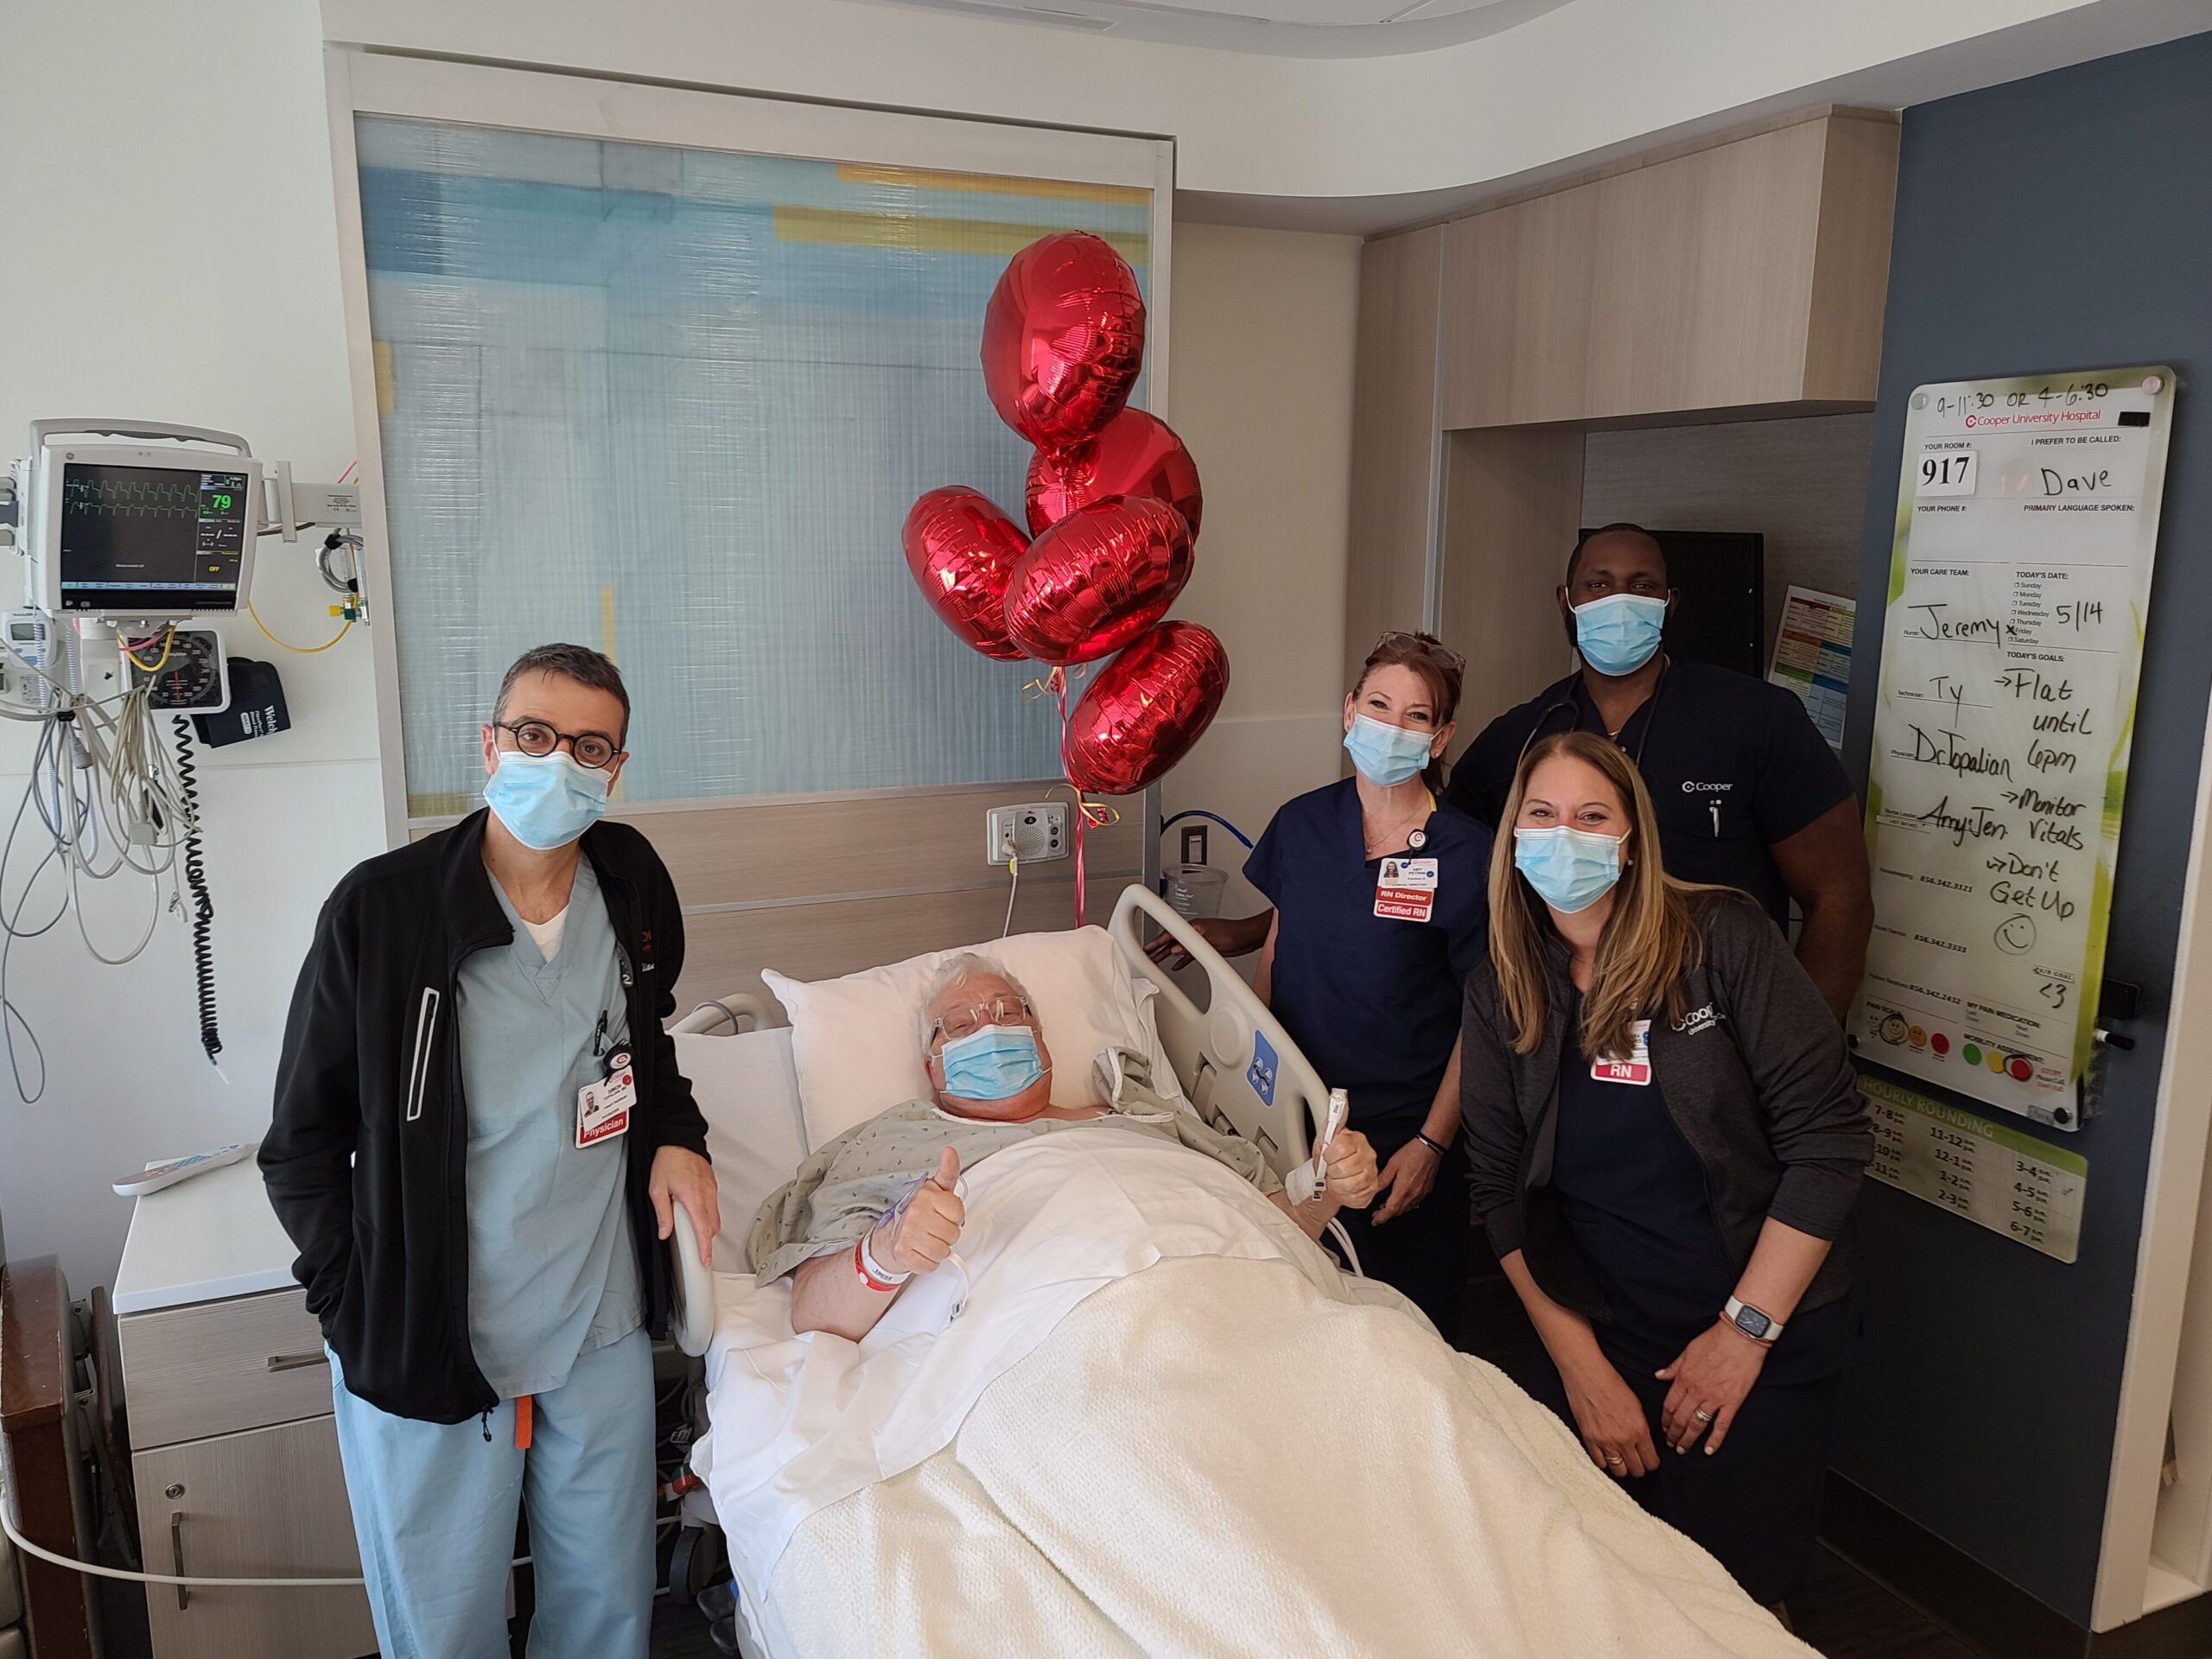 Joseph Borgese, the 1,000th TAVR patient at Cooper, with his Cardiac Partners at Cooper and Inspira heart team, from left to right, Simon K. Topalian, MD, FACC, Interventional Cardiologist; Amy Petrini, BSN, RN, PCCN, Cardiology Clinical Director; Jeremy Witcher, RN; and Tara Jones, RN, BSN, Structural Heart Nurse Navigator.